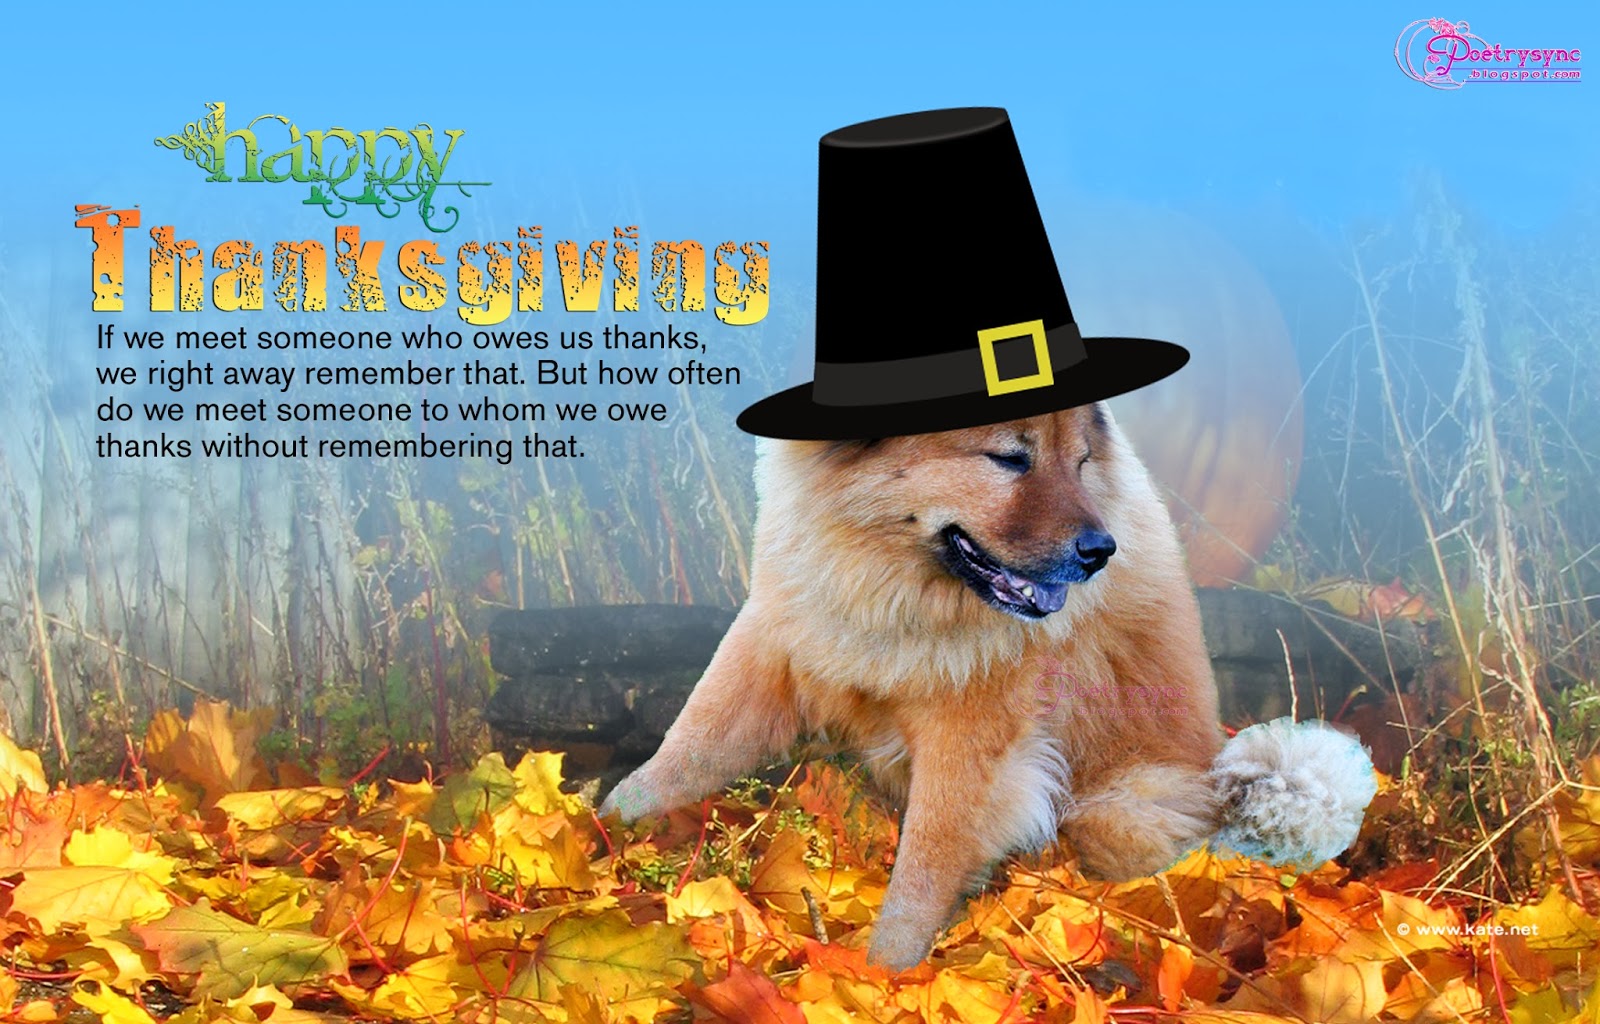 Thanksgiving Day Wishes Quotes Cards And Pictures With